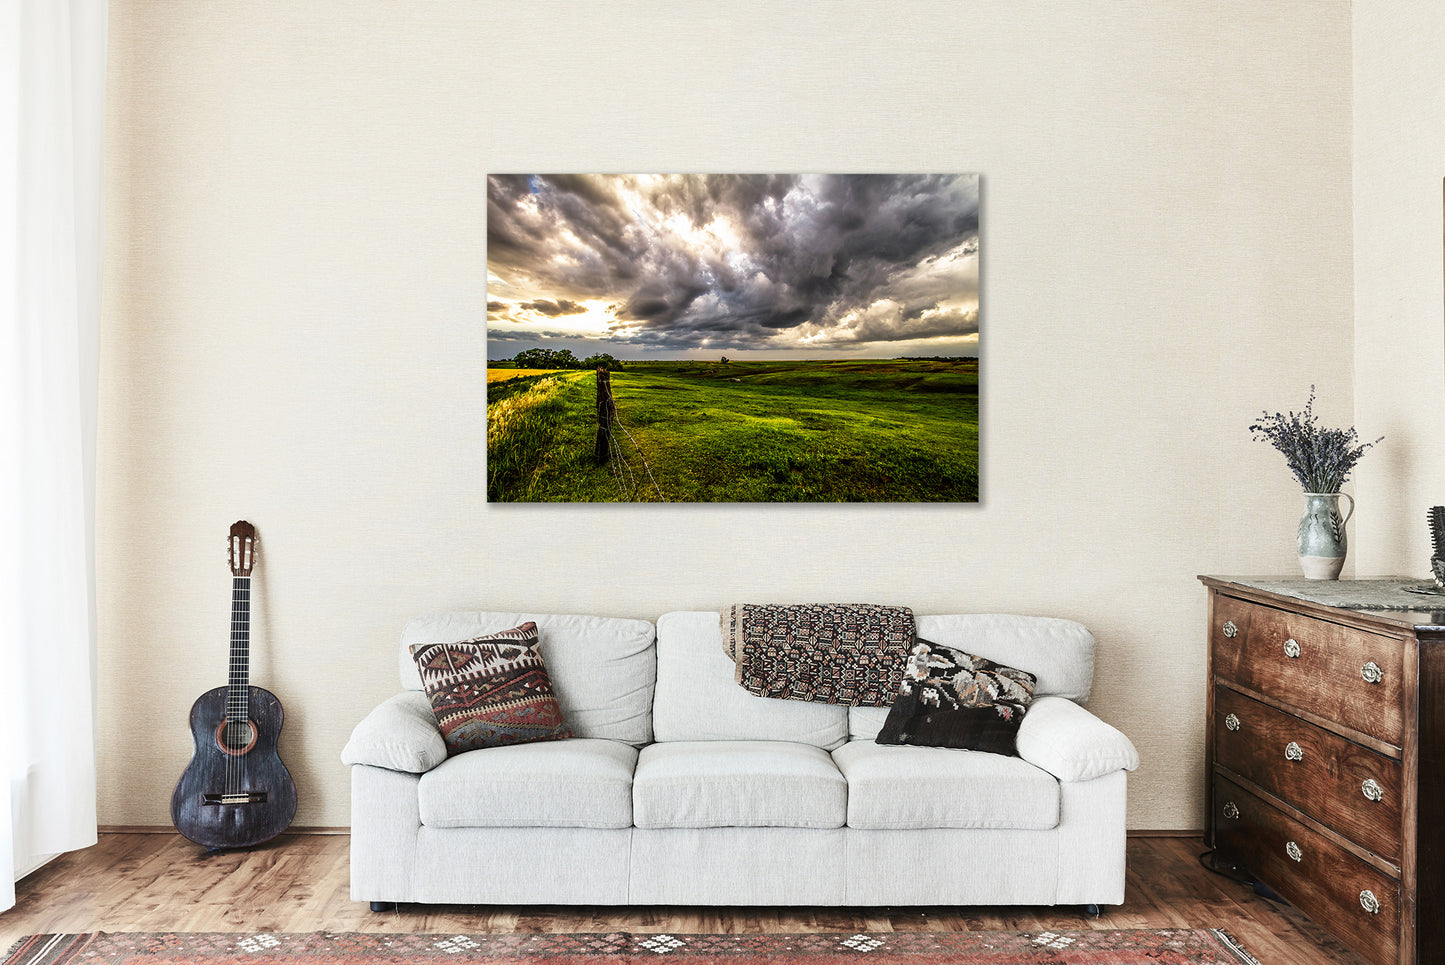 Great Plains Metal Print (Ready to Hang) Photo on Aluminum of Stormy Sky Over Sunlit Prairie on Spring Day in Nebraska Landscape Wall Art Country Decor